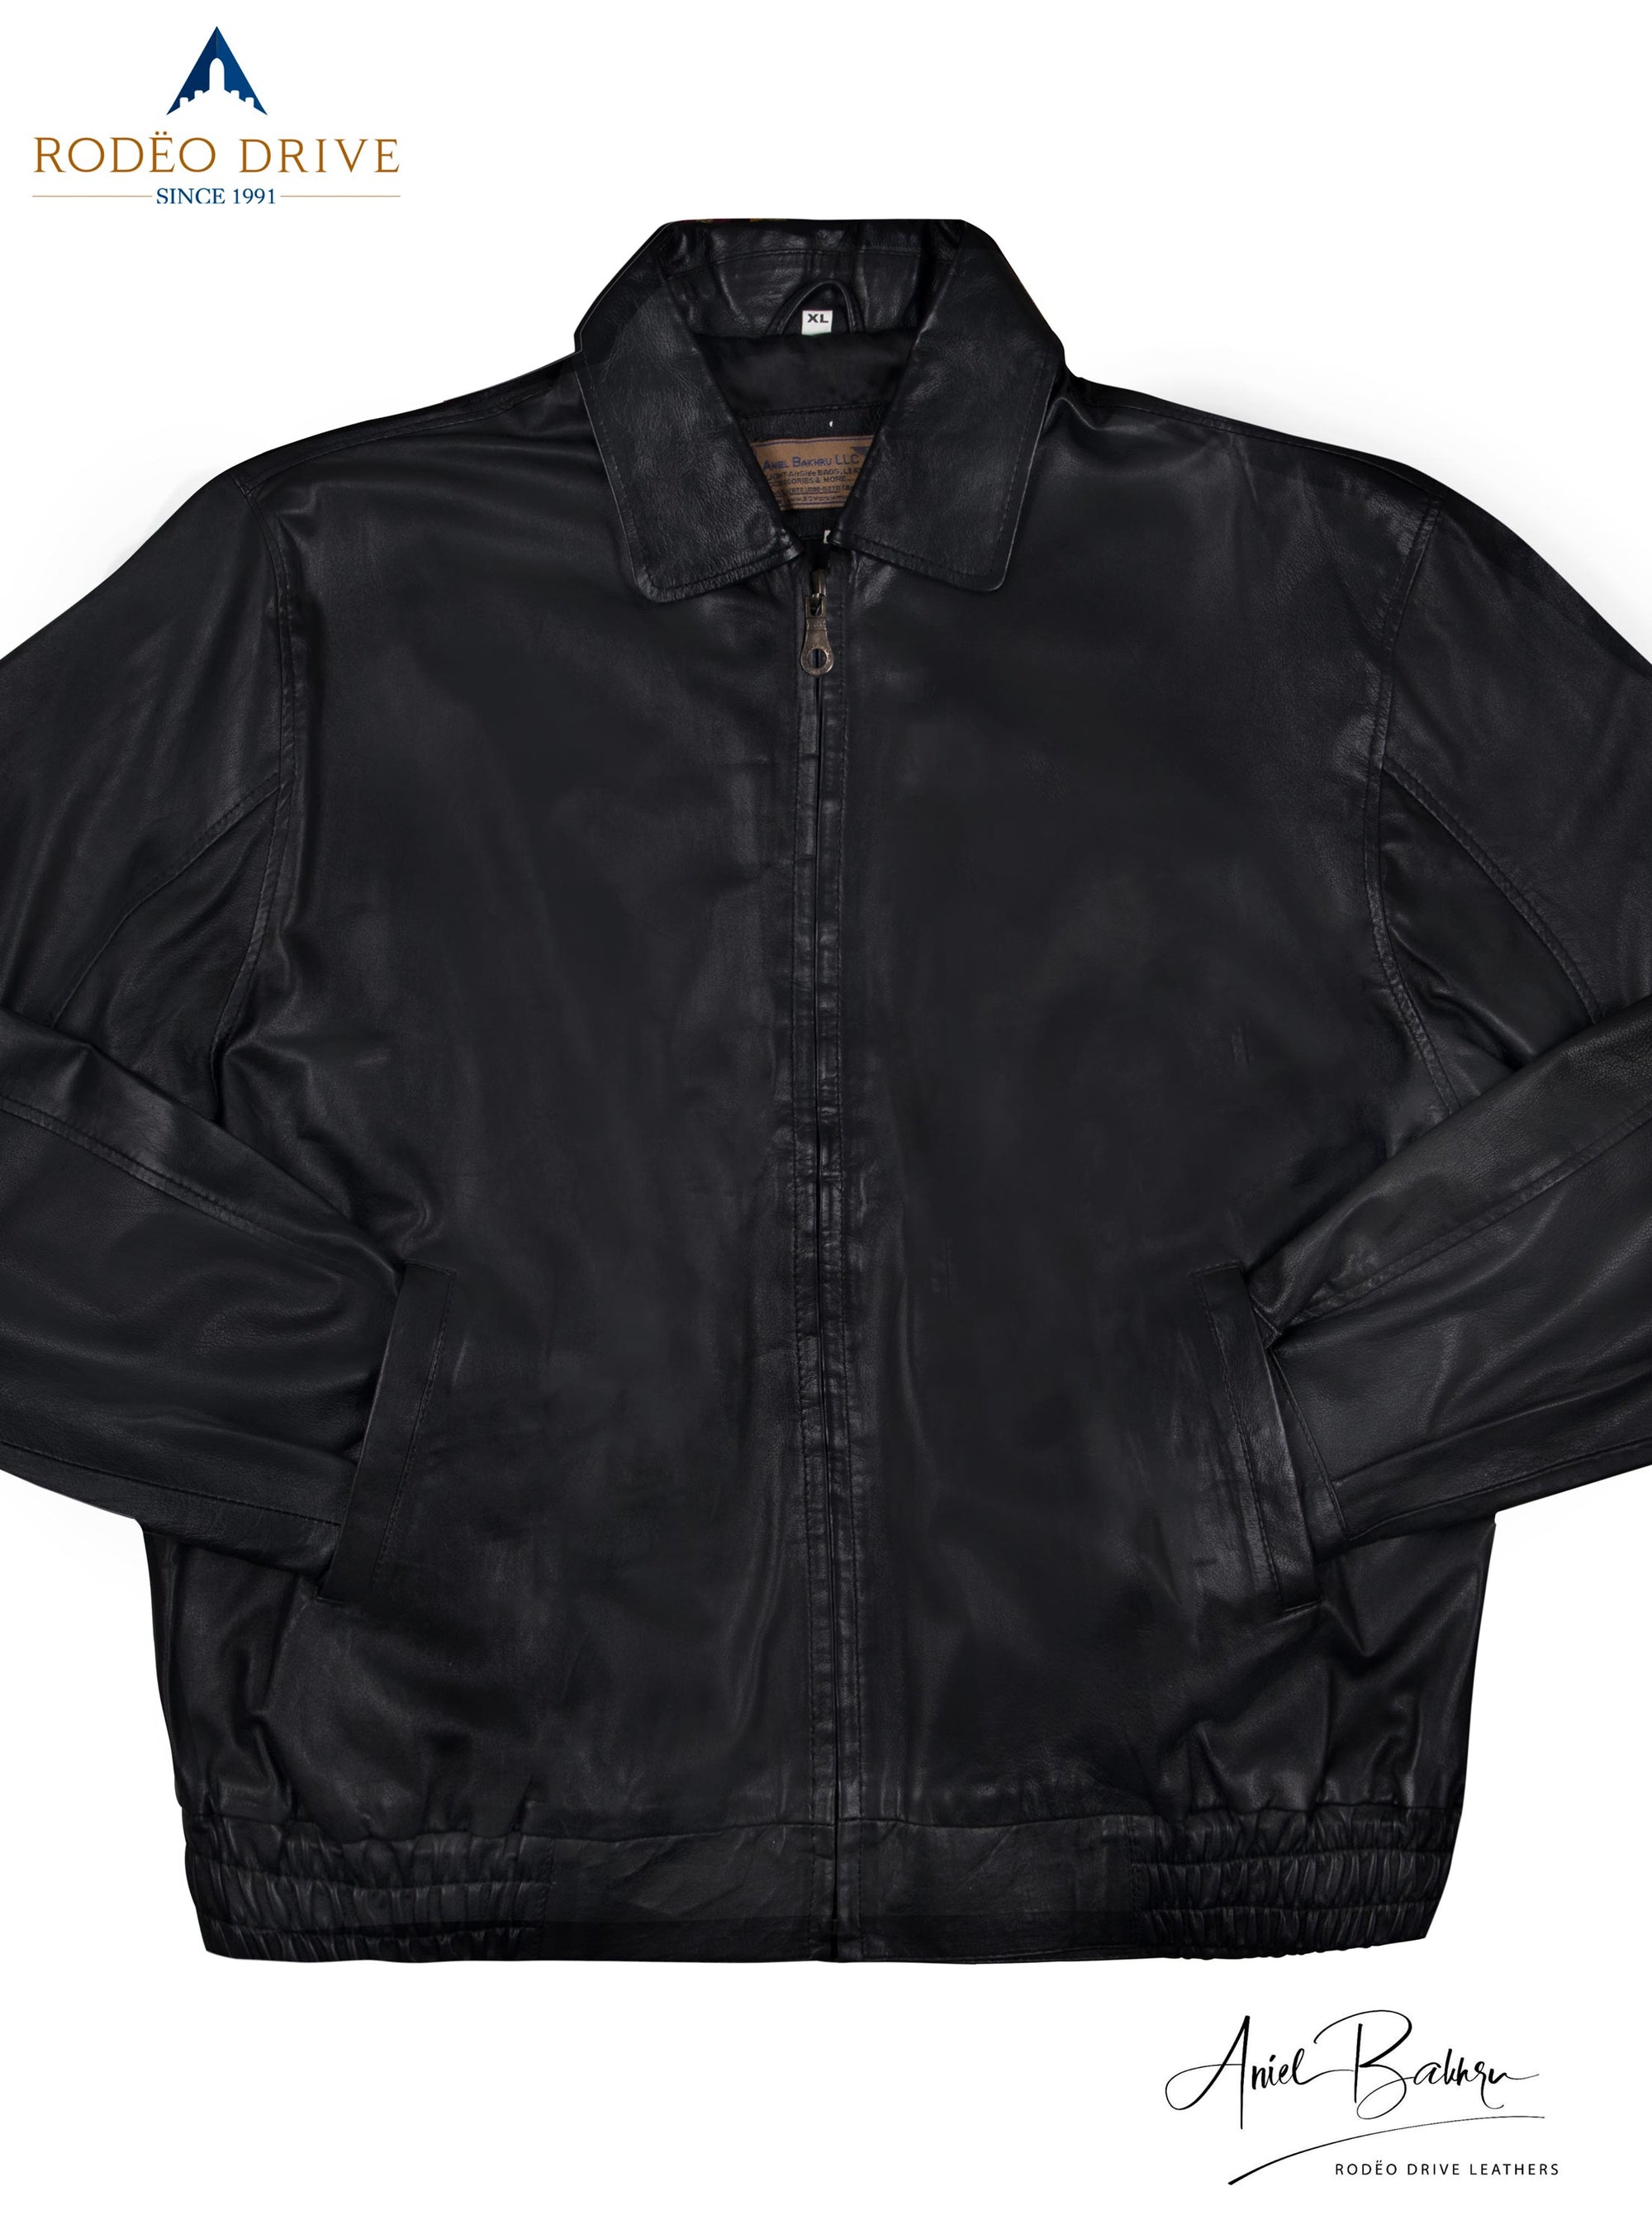 Close full view of Bomber jacket. It is black in color, zipped and its hands are tucked in slit pocket.